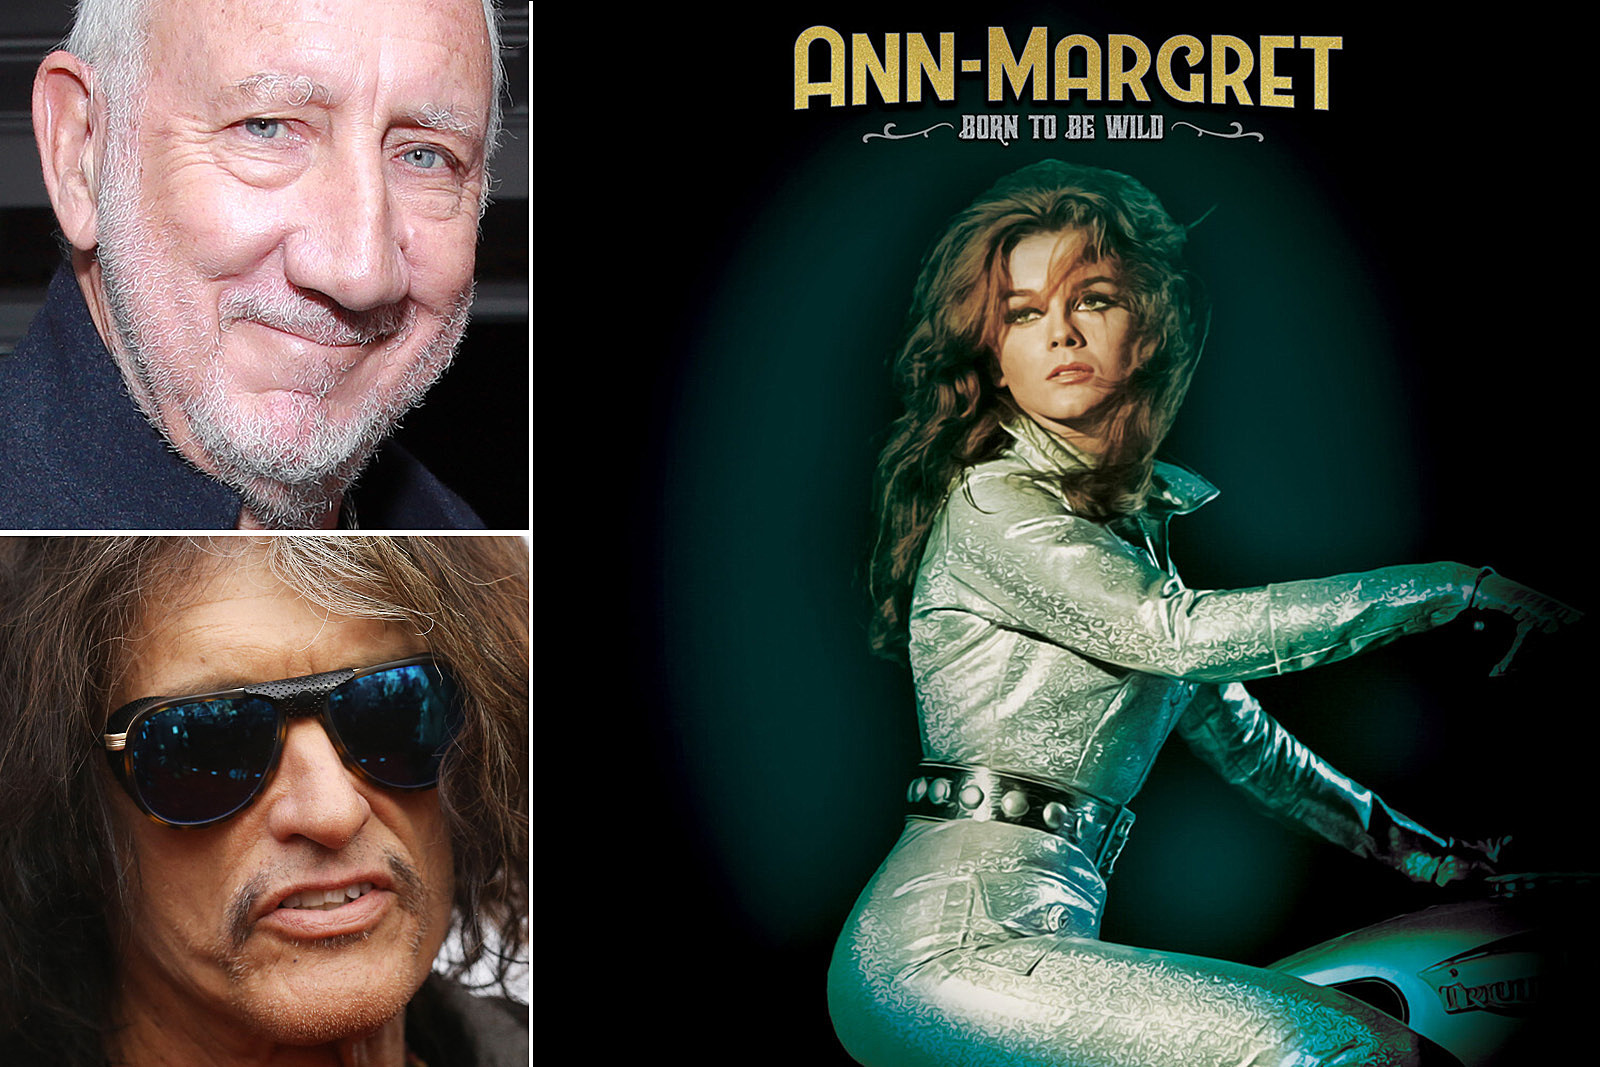 Pete Townshend and Joe Perry Guest on Ann-Margret’s New Album